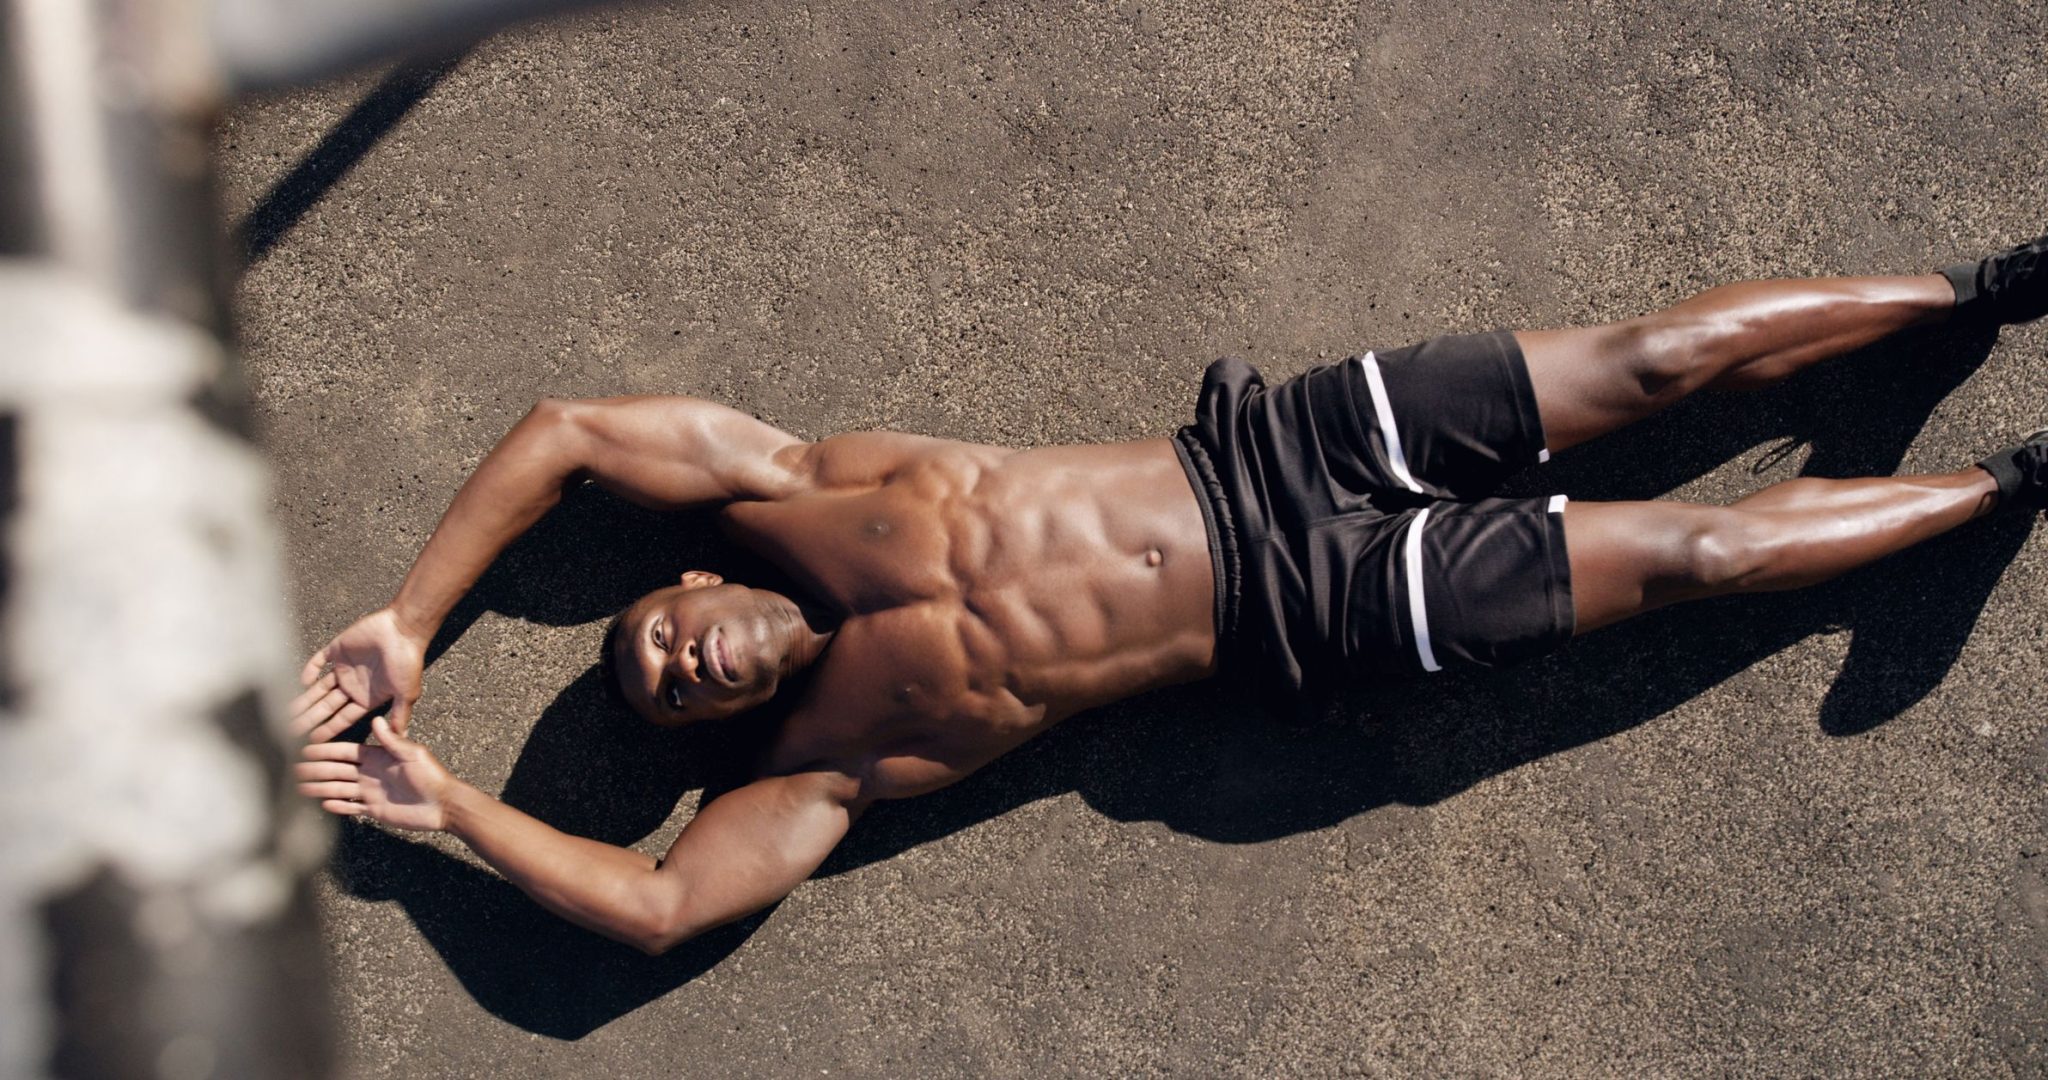 10 Abs Exercises That’ll Add Major Muscle Definition To Your Midsection